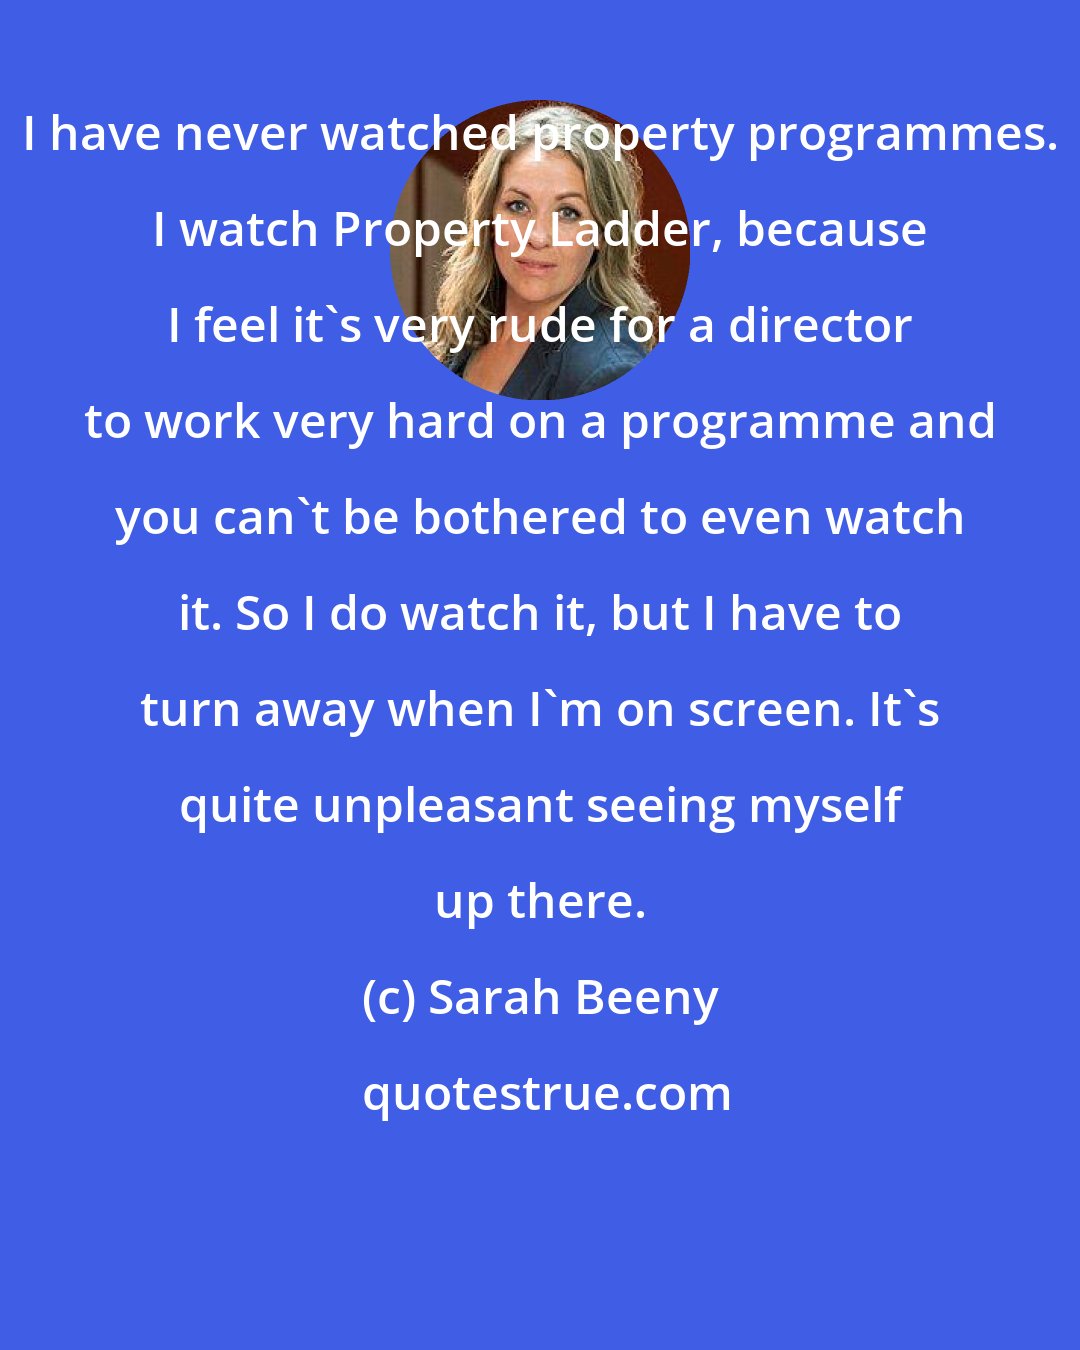 Sarah Beeny: I have never watched property programmes. I watch Property Ladder, because I feel it's very rude for a director to work very hard on a programme and you can't be bothered to even watch it. So I do watch it, but I have to turn away when I'm on screen. It's quite unpleasant seeing myself up there.